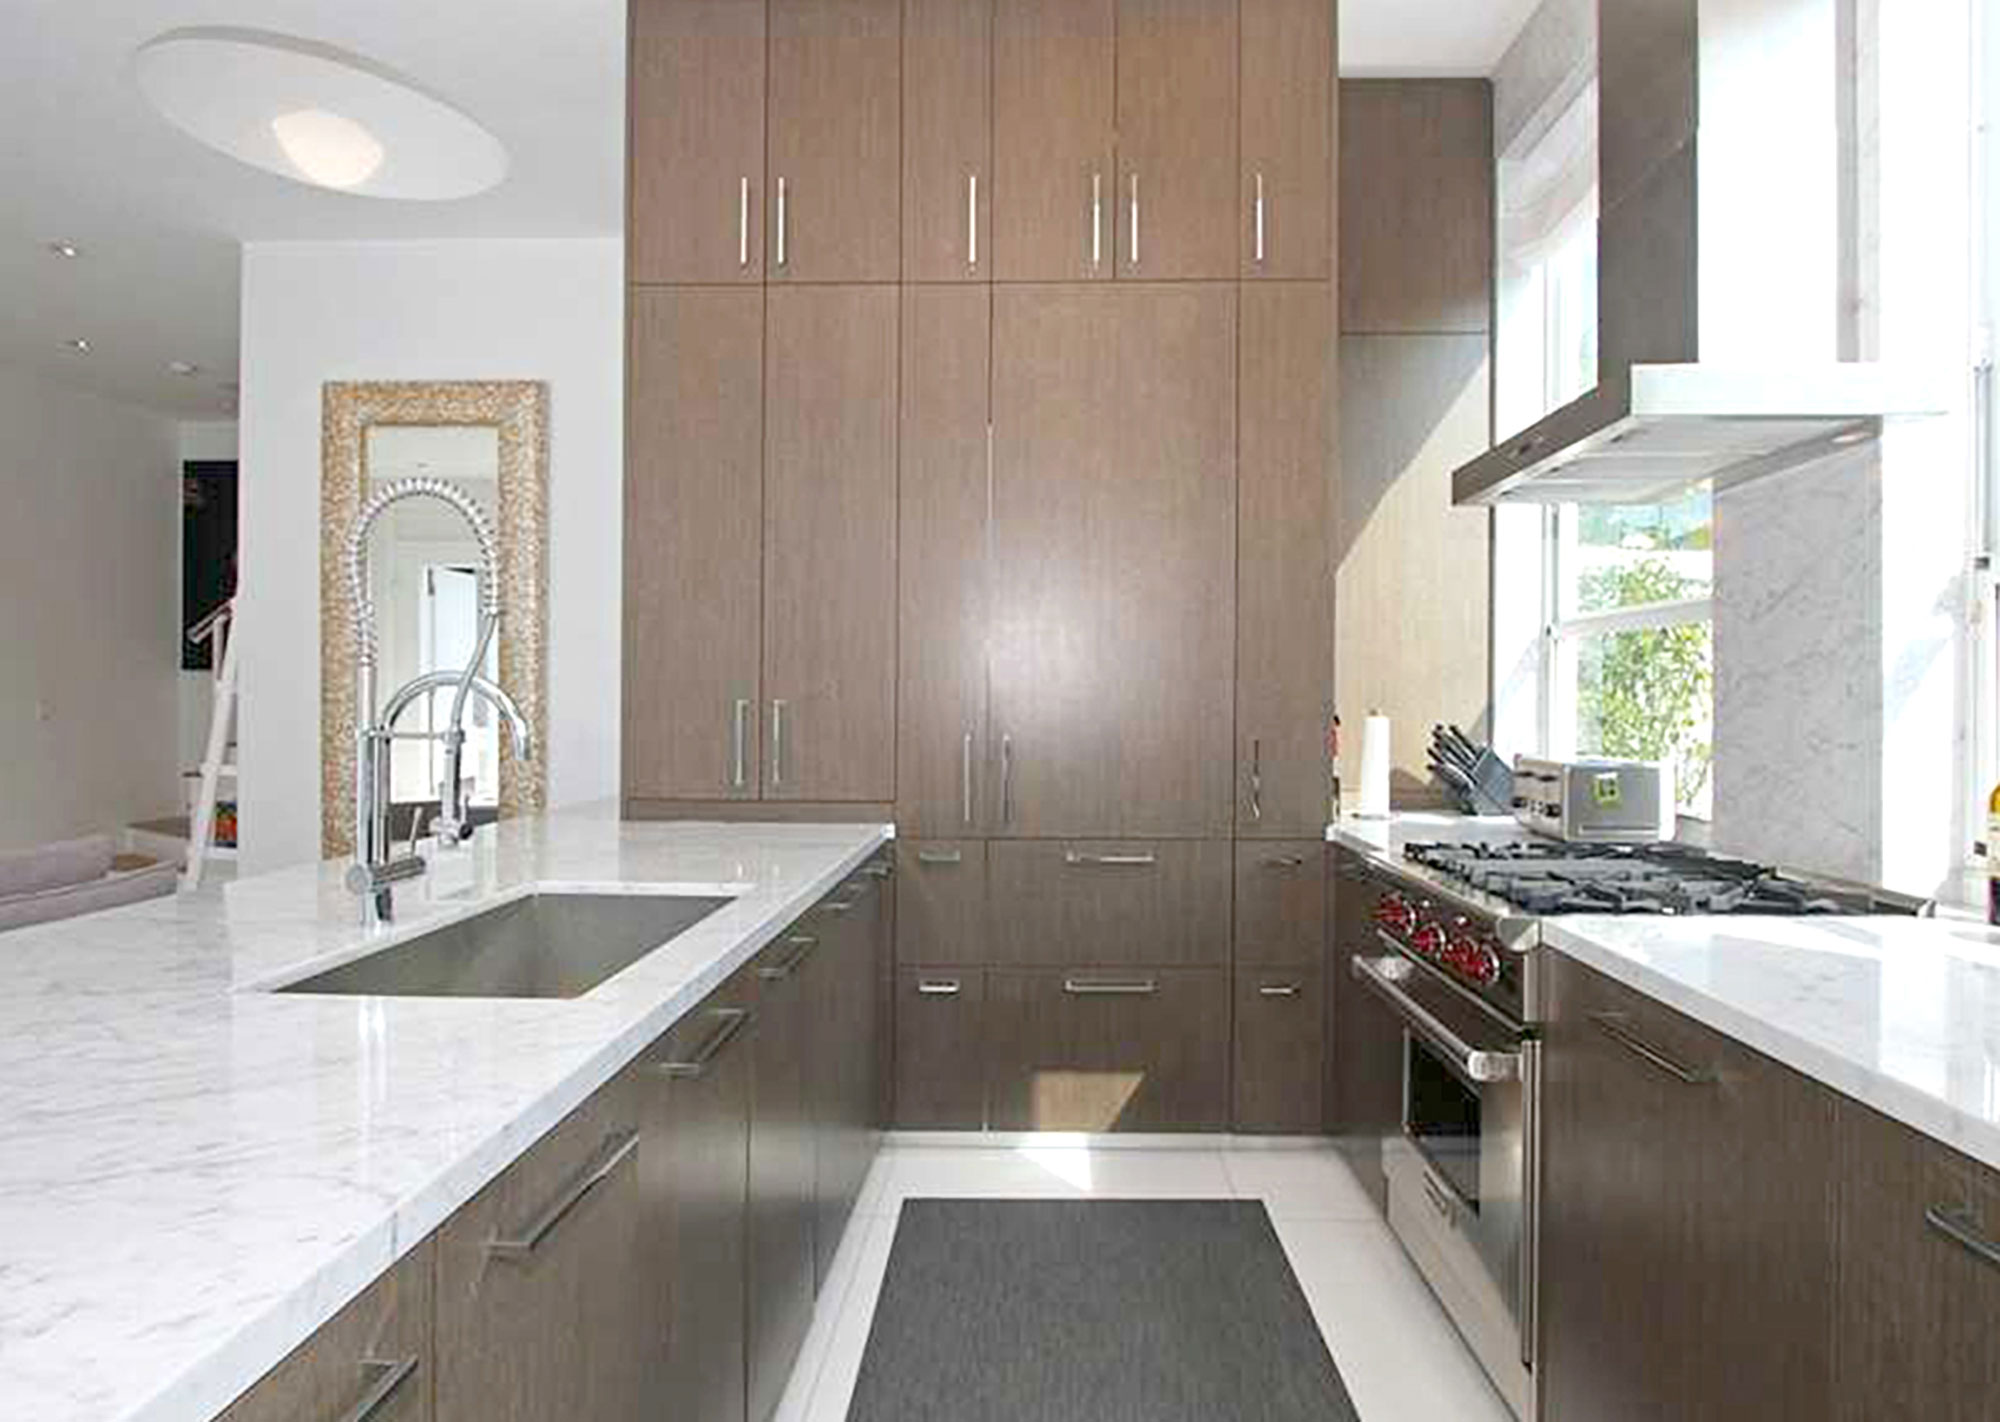 cabinet makers, quality custom cabinetry, pantry cabinets, custom cabinets-north bay road 1, custom cabinetry